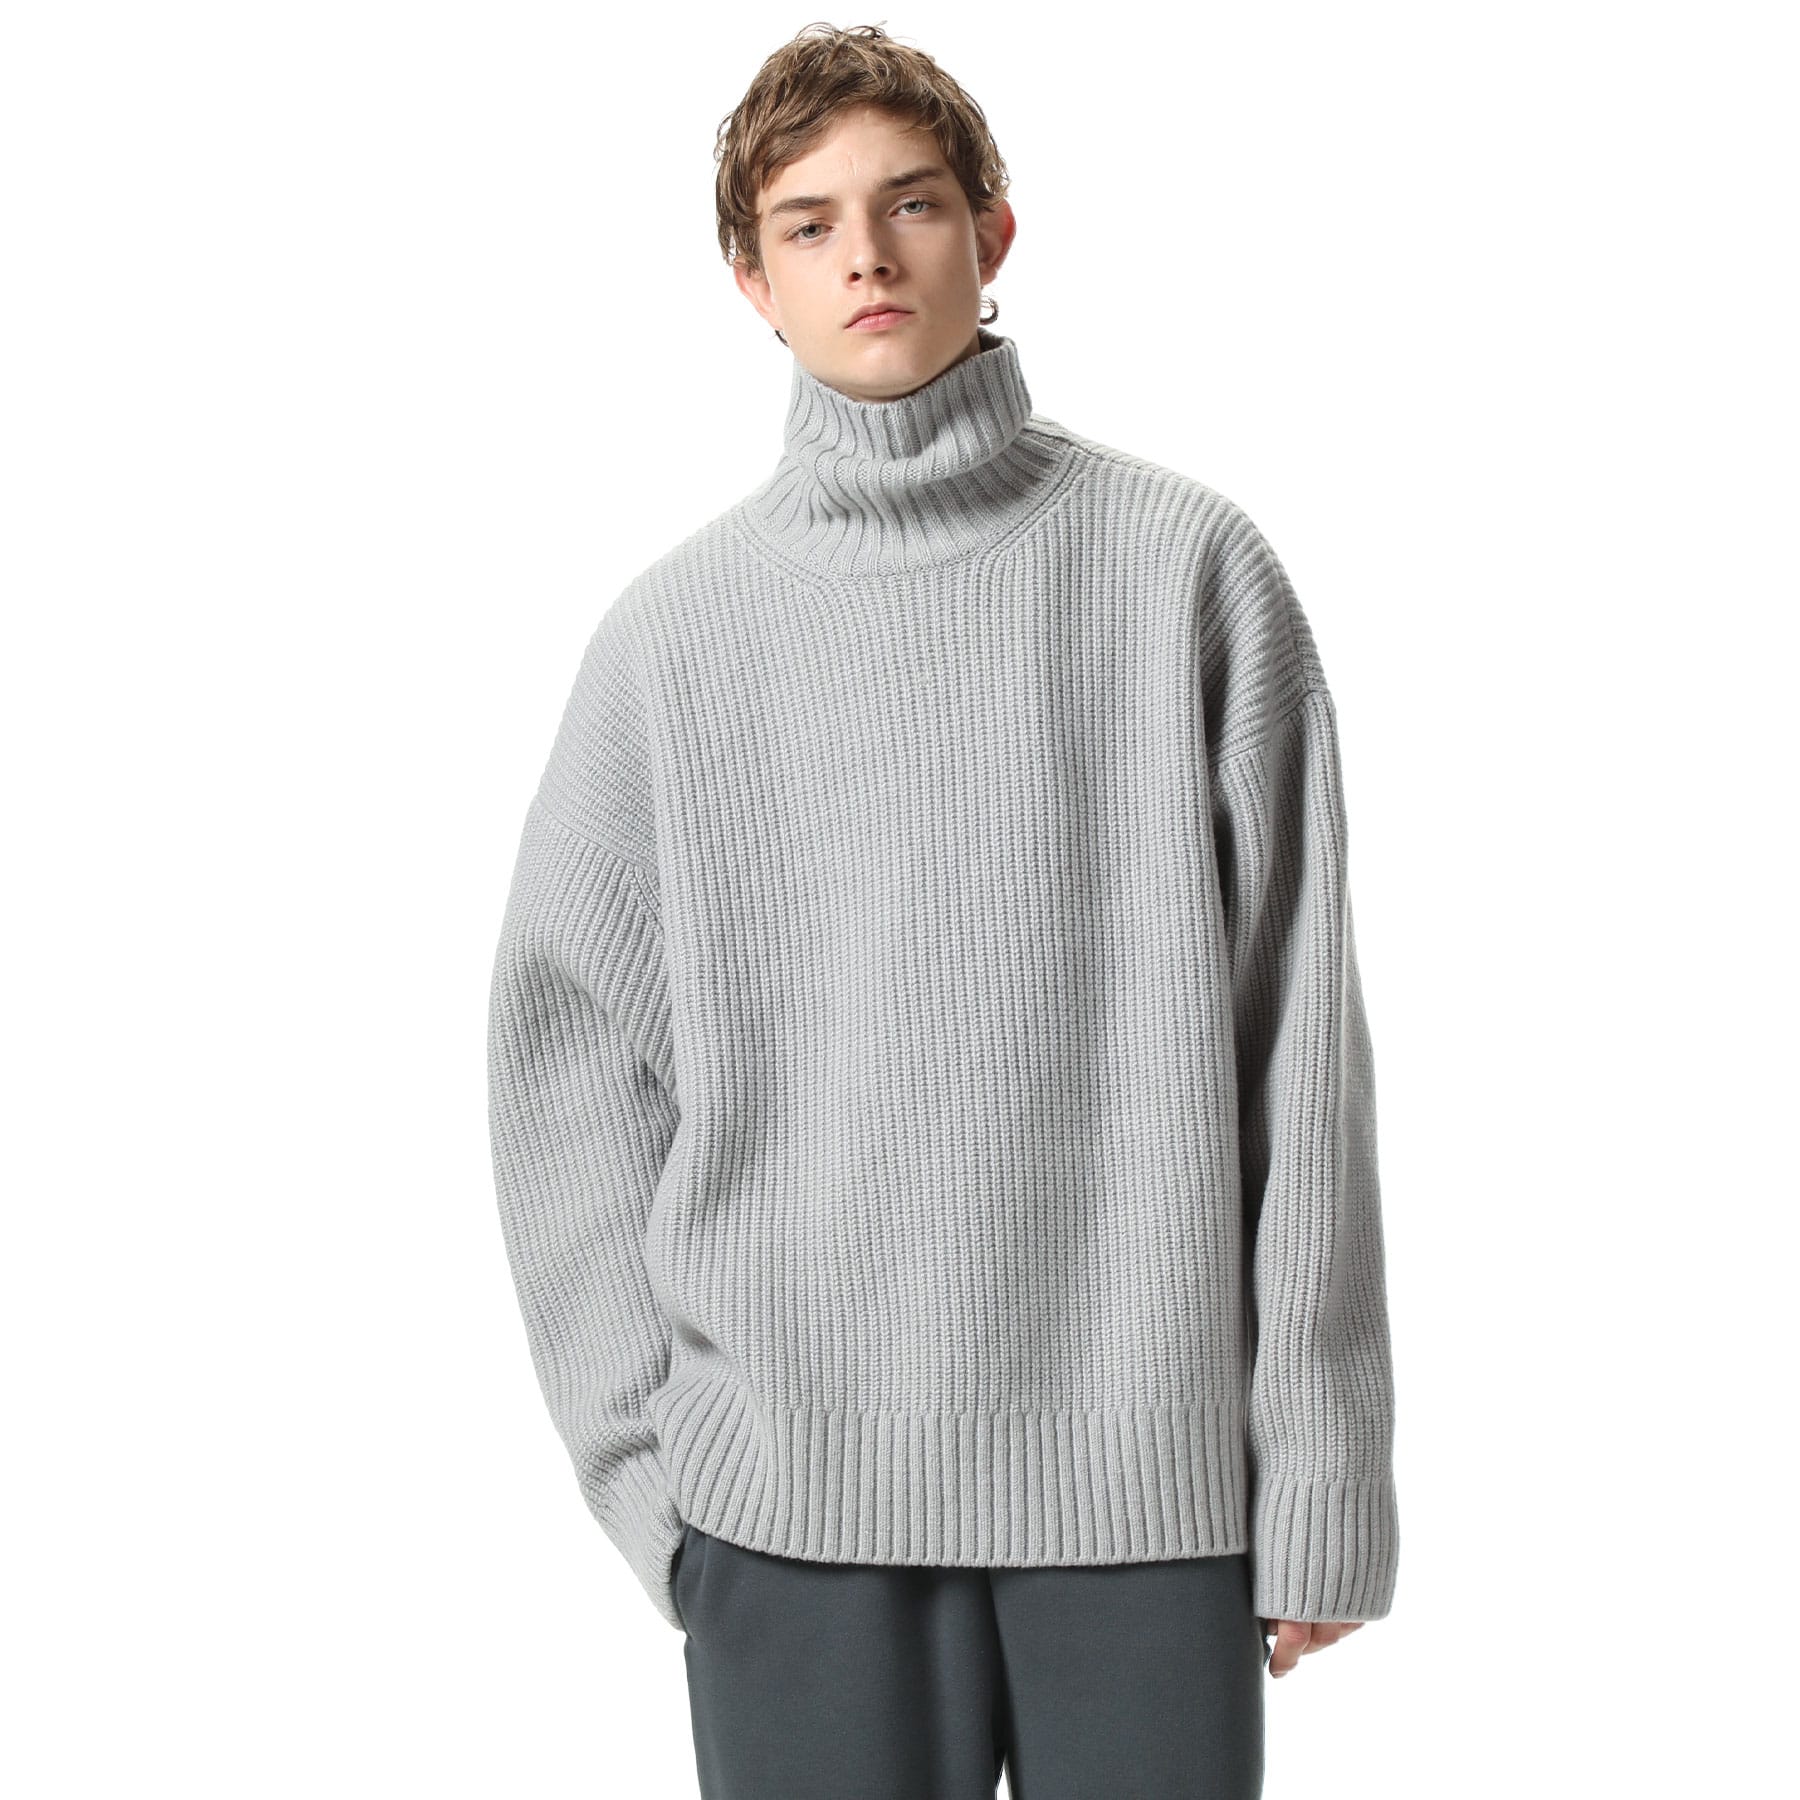 SOPH. | BAGGY TURTLE NECK KNIT(FREE GRAY):